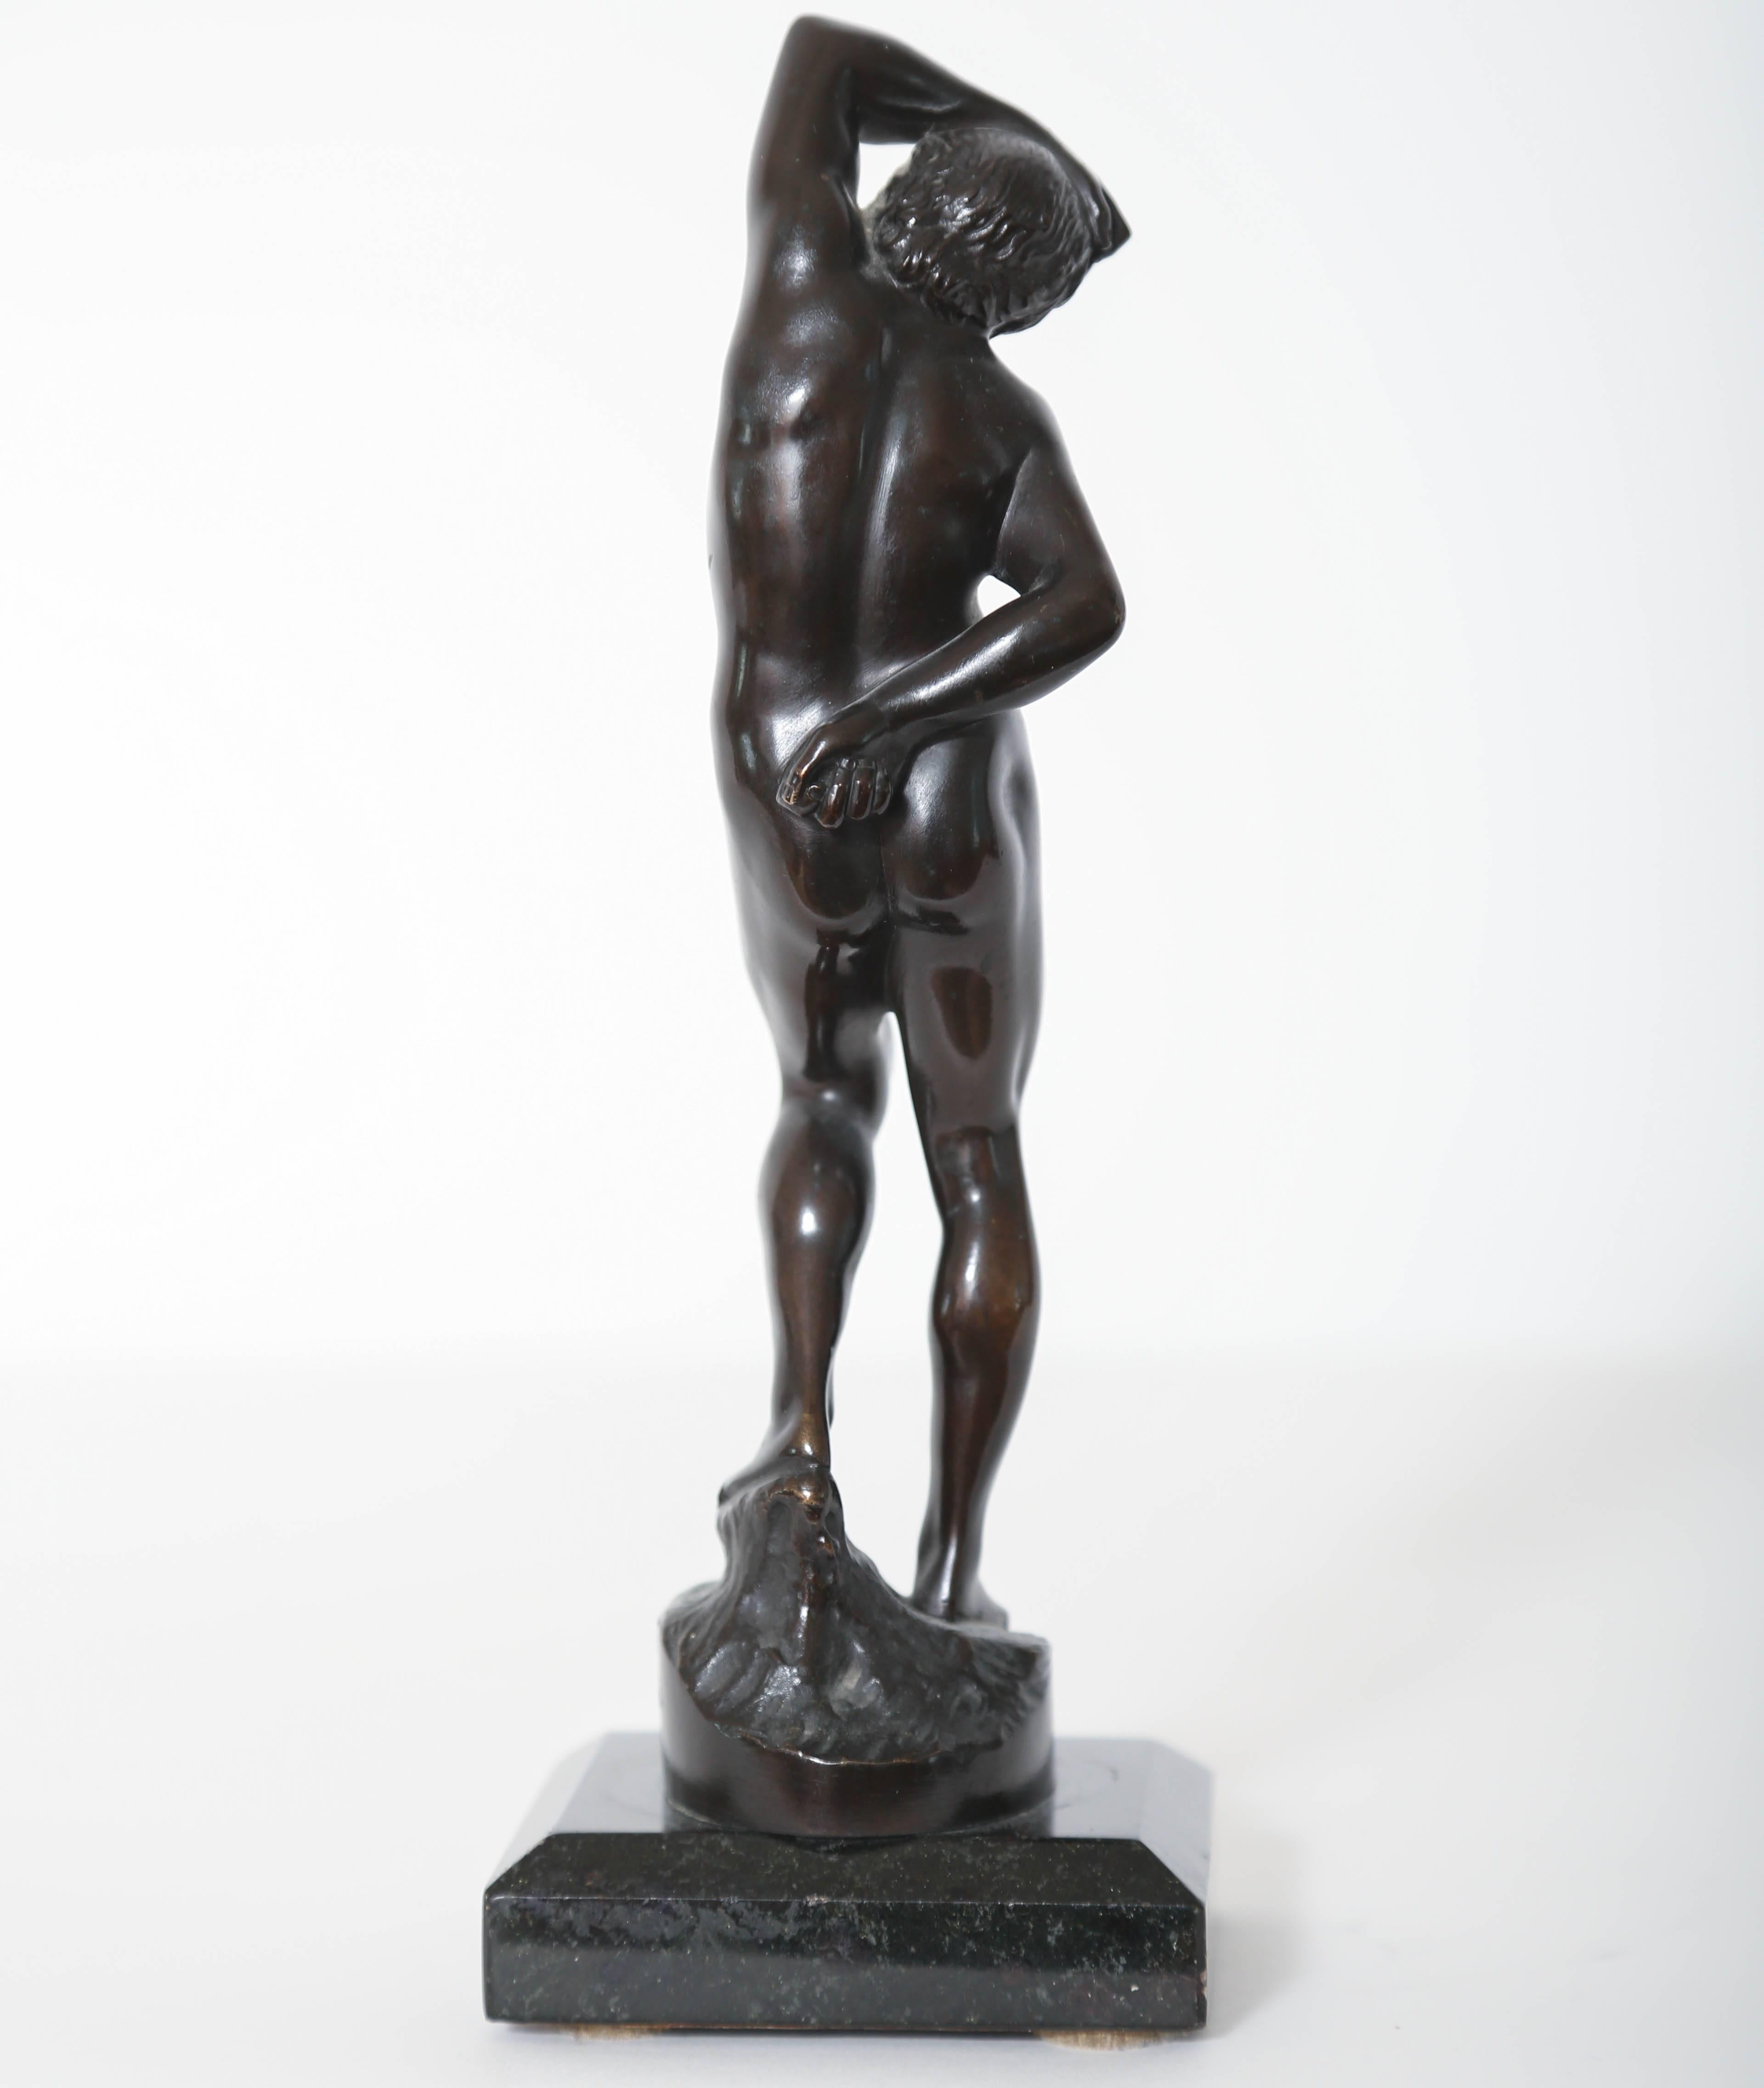 Cast Bronze Sculpture of Nude Narcissus, after Barthelemy Prieur, German, circa 1900